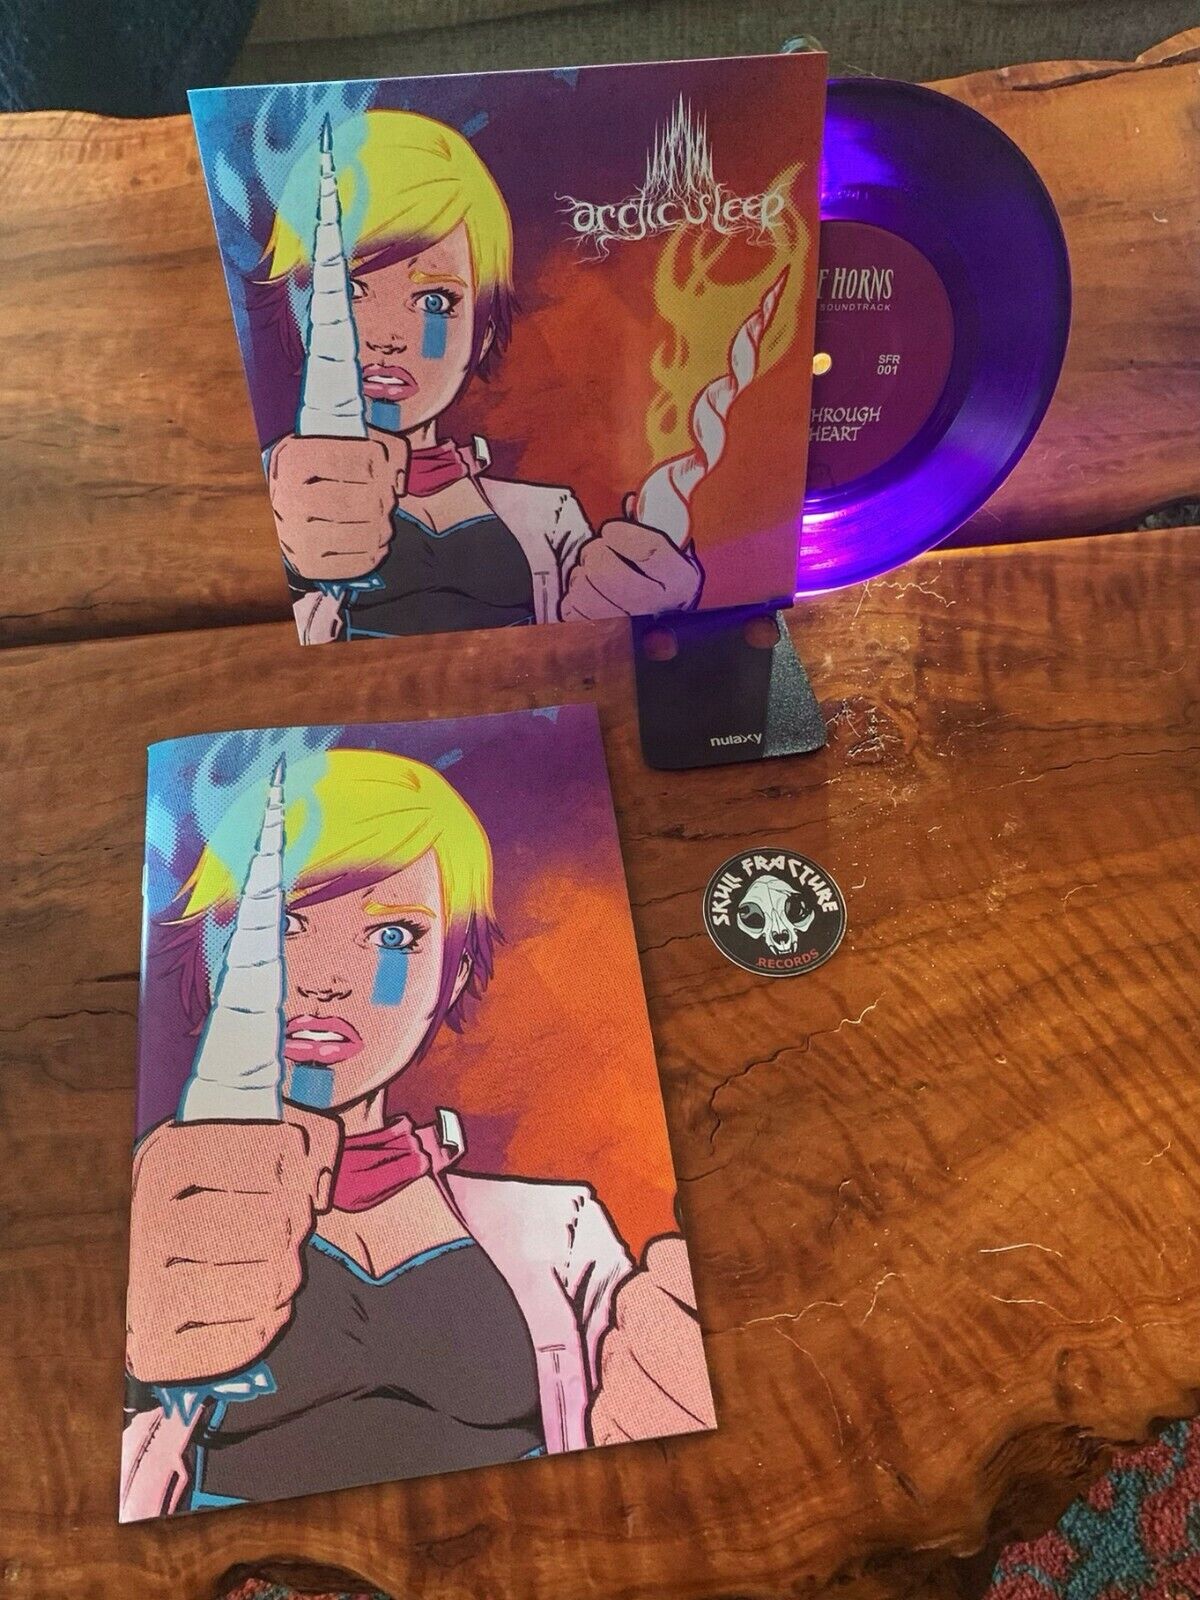 BY THE HORNS comic Issue #1 + Original Soundtrack Vinyl by ARCTIC SLEEP